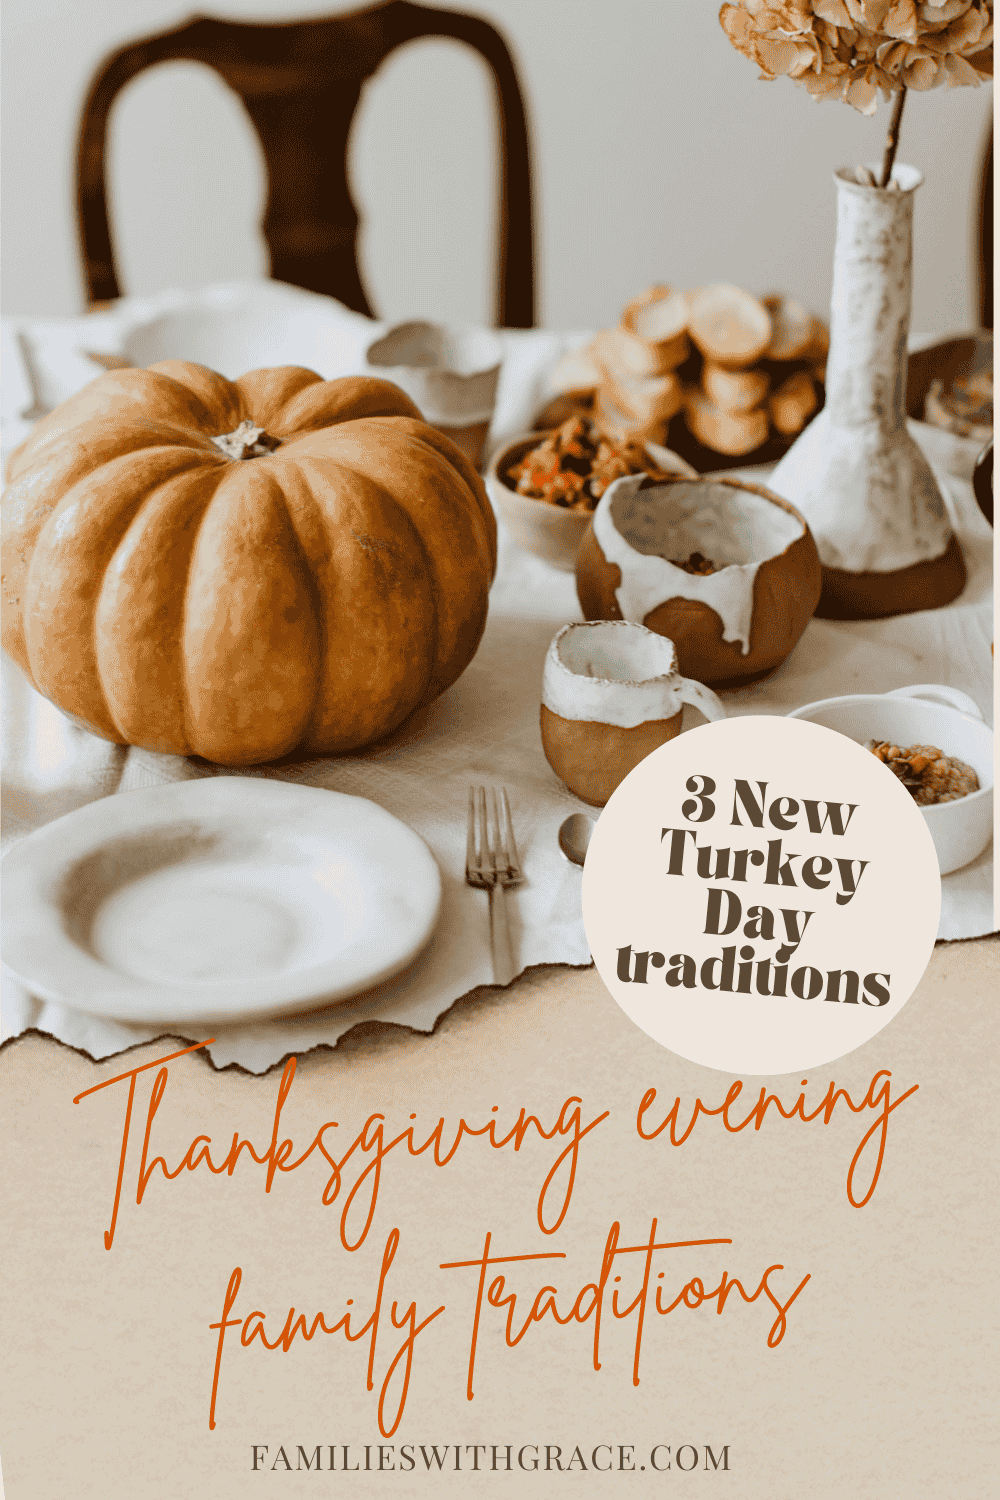 3 New Thanksgiving traditions to start